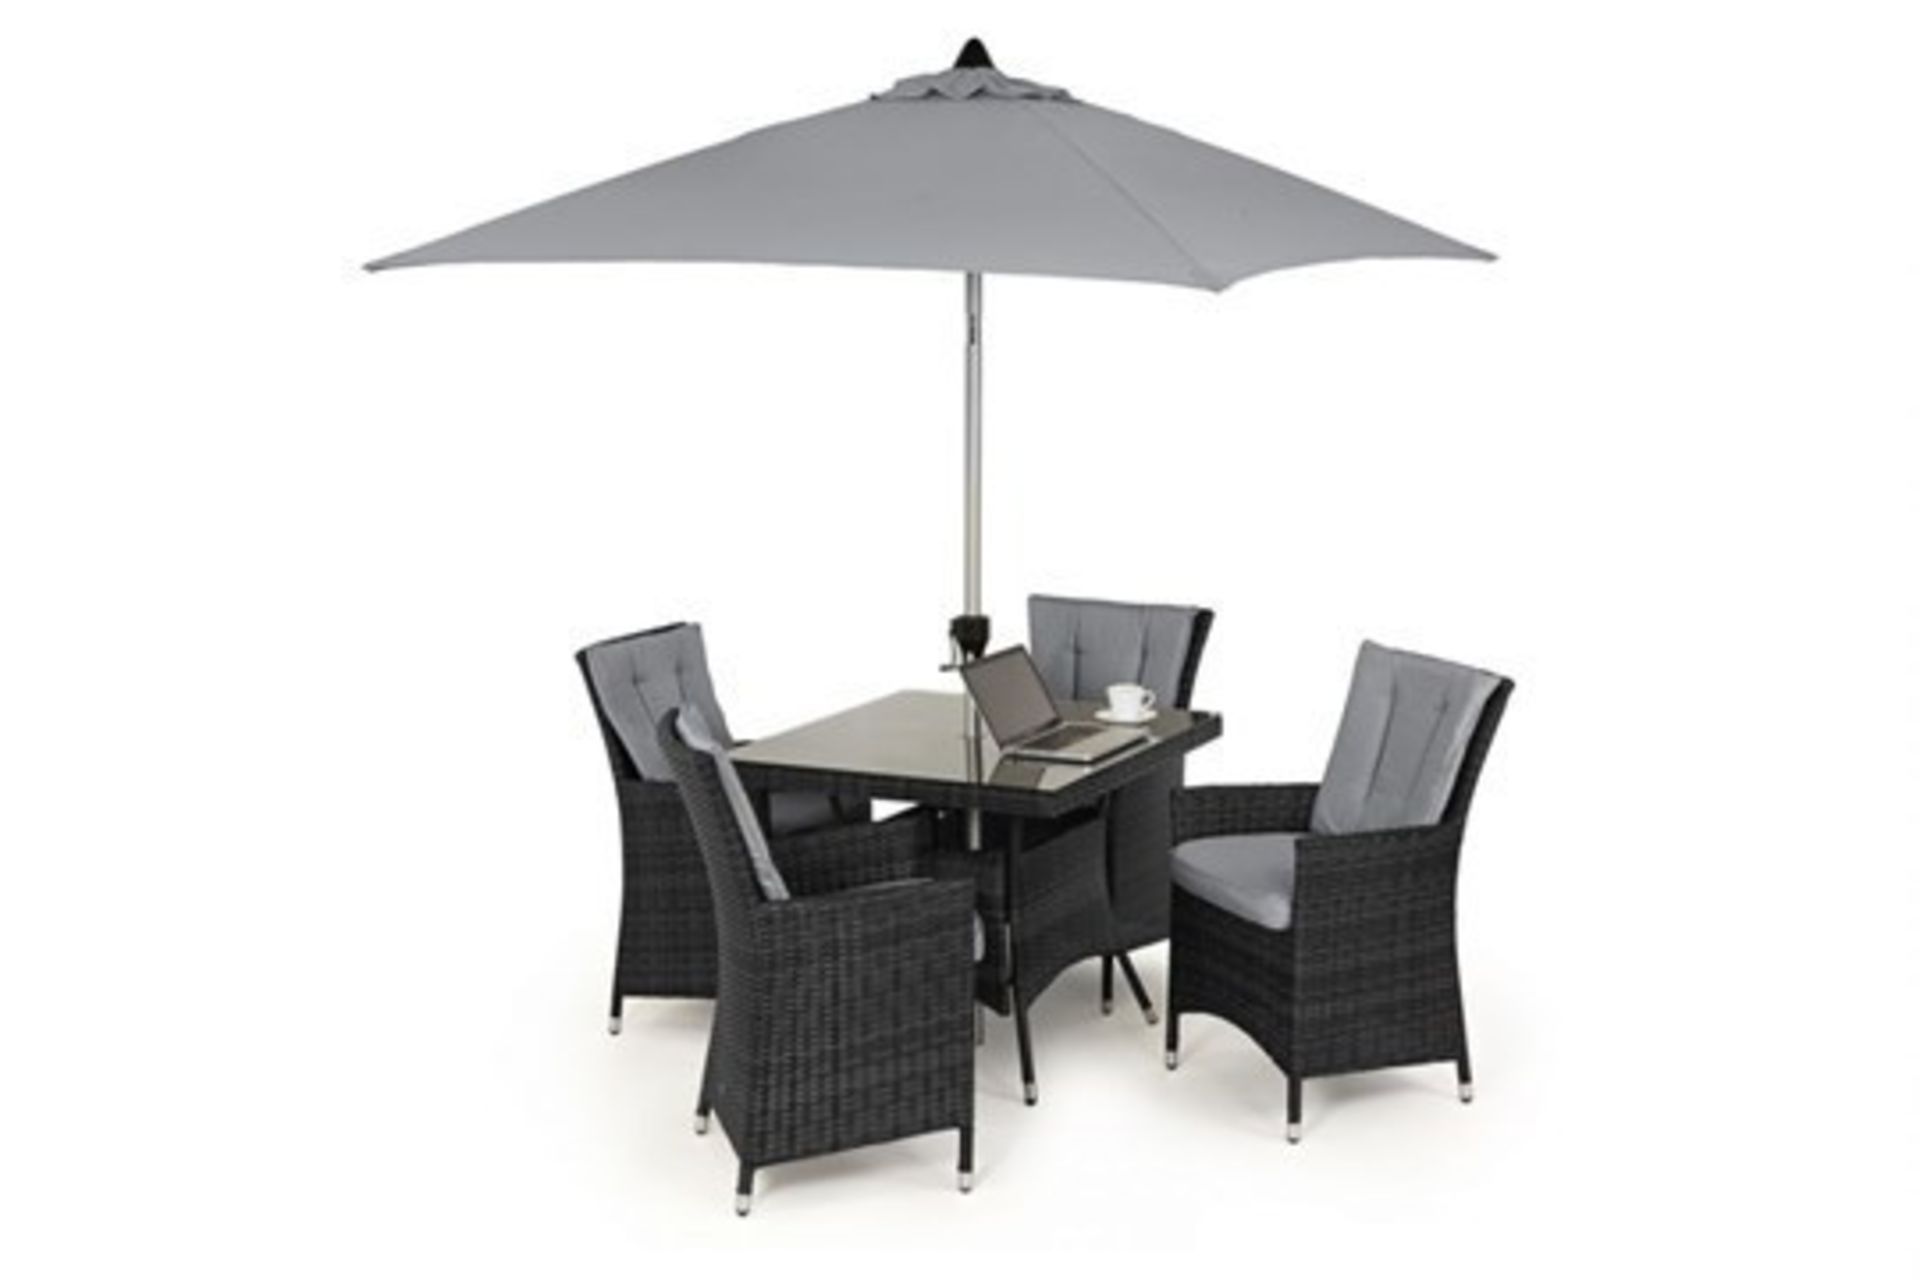 Rattan LA 4 Seat Square Outdoor Dining Set With Parasol (Grey) *BRAND NEW*